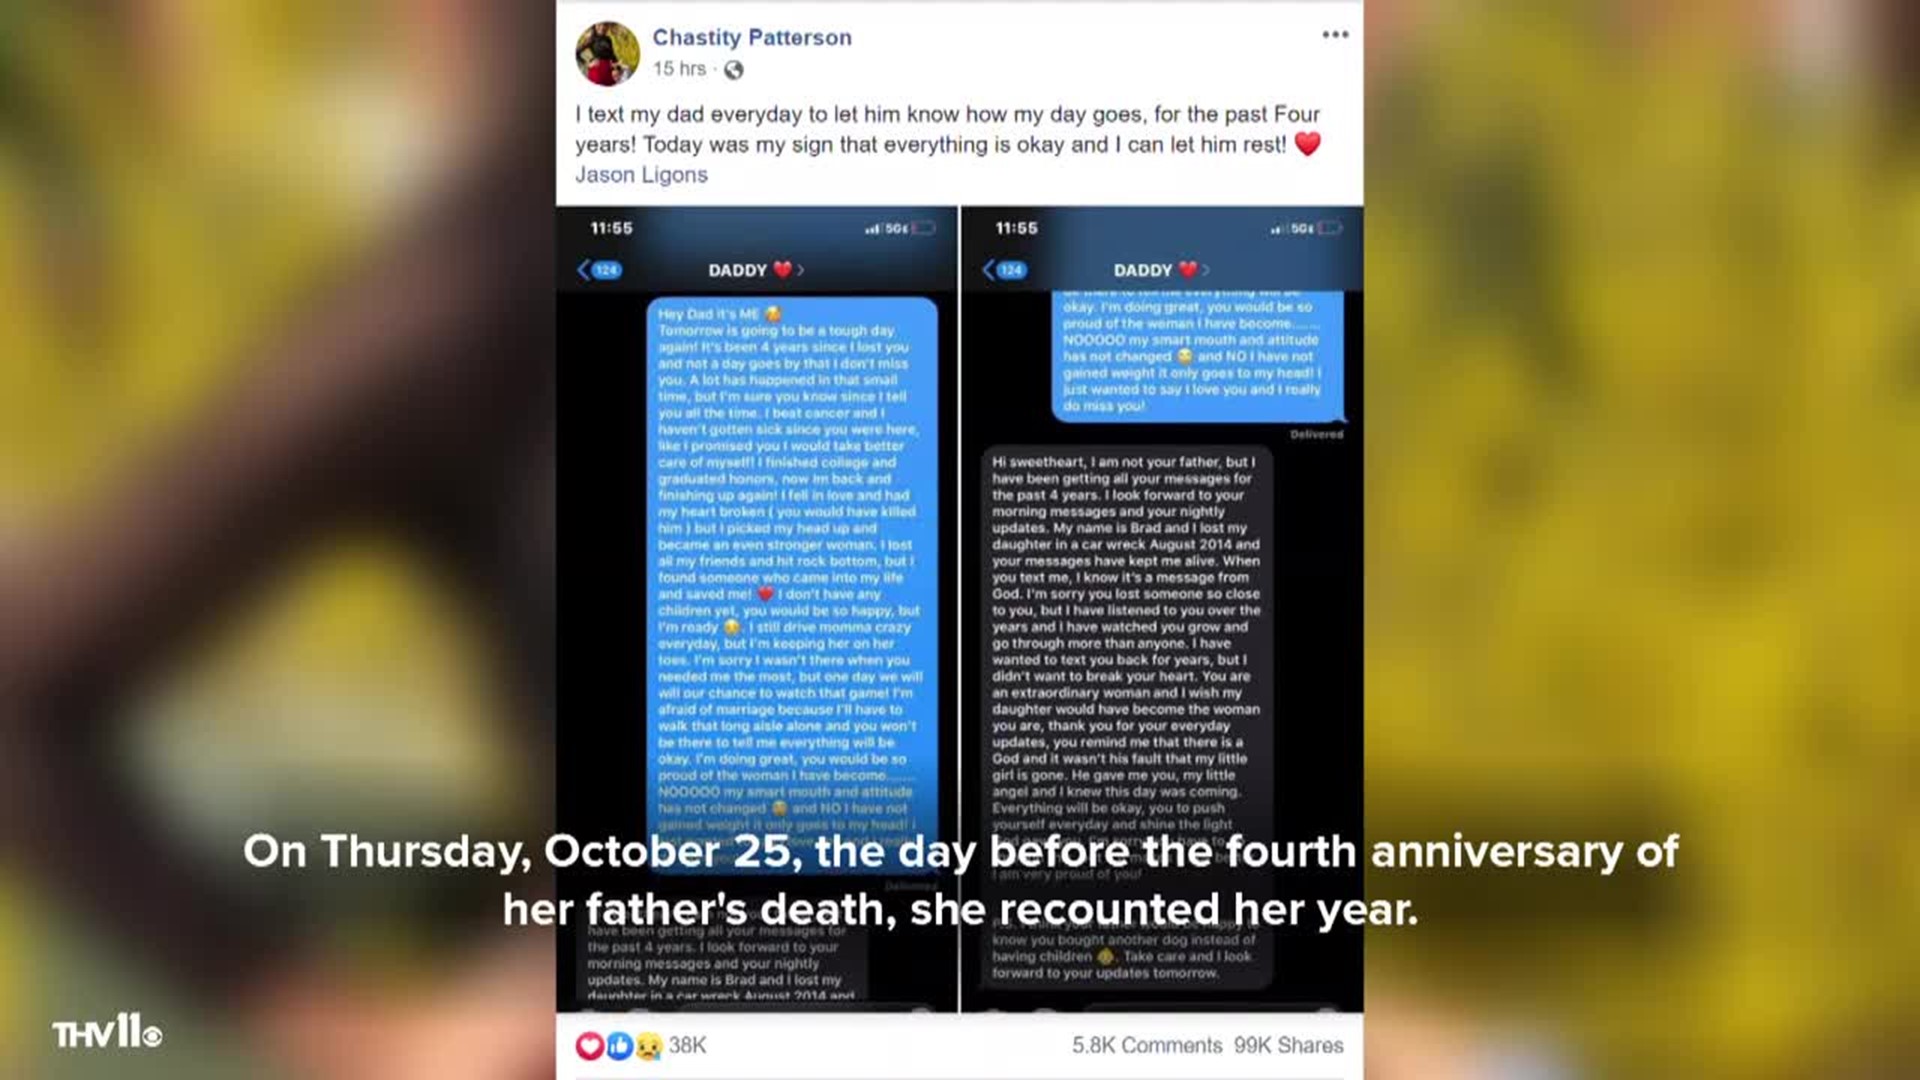 She texted her father's number on 4th anniversary of his death. This year she got a reply